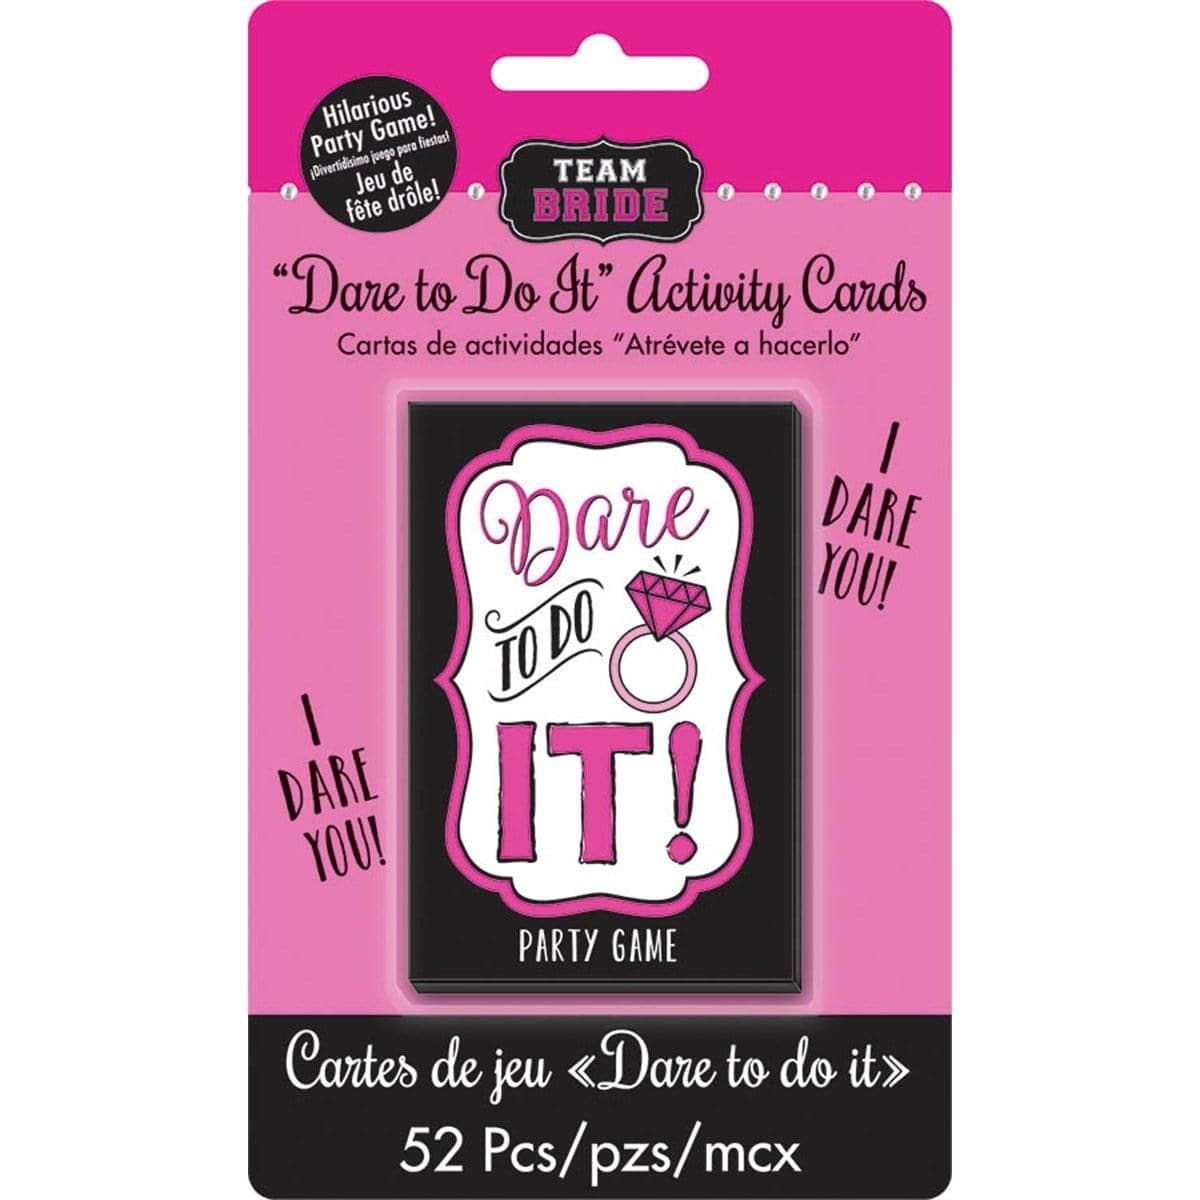 Buy Bachelorette Team Bride Truth or Dare card game sold at Party Expert